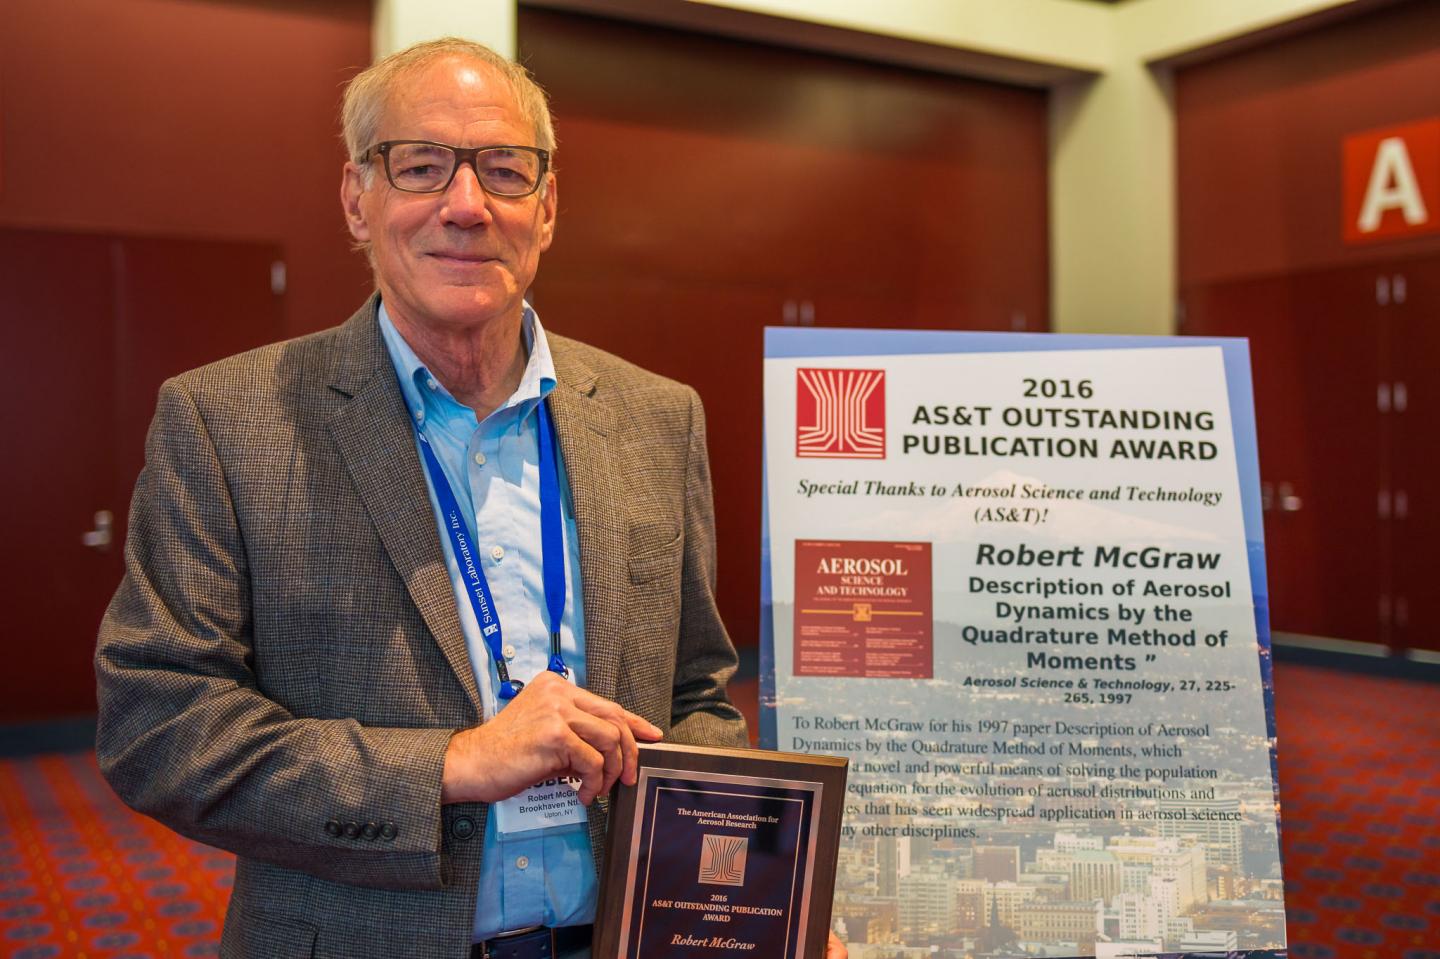 Robert McGraw at the 2016 American Association for Aerosol Research Annual Conference